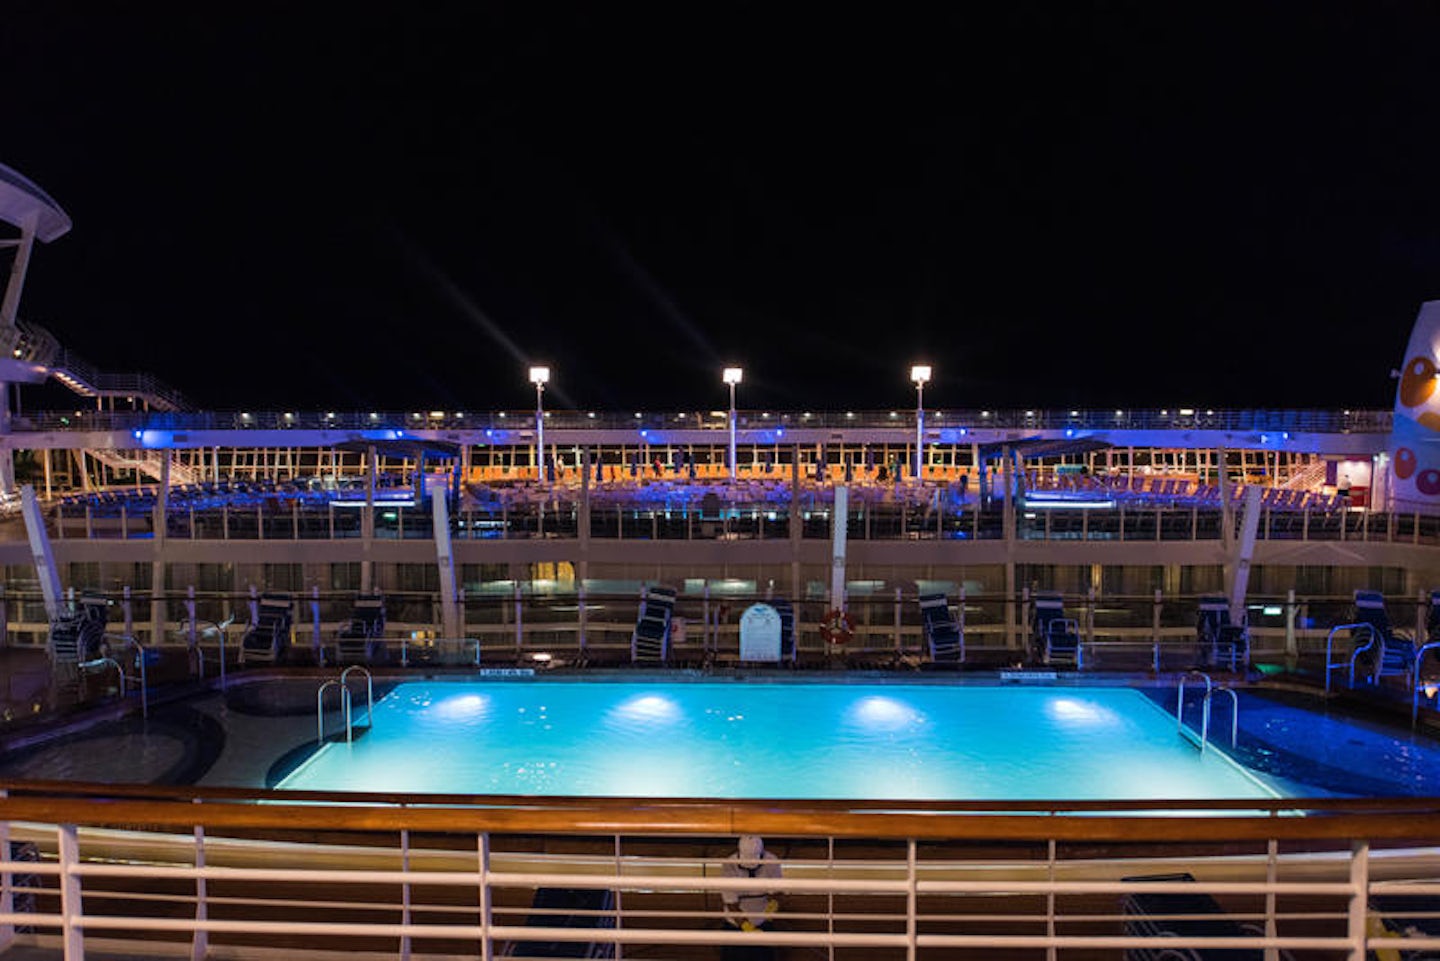 The Main Pool on Oasis of the Seas